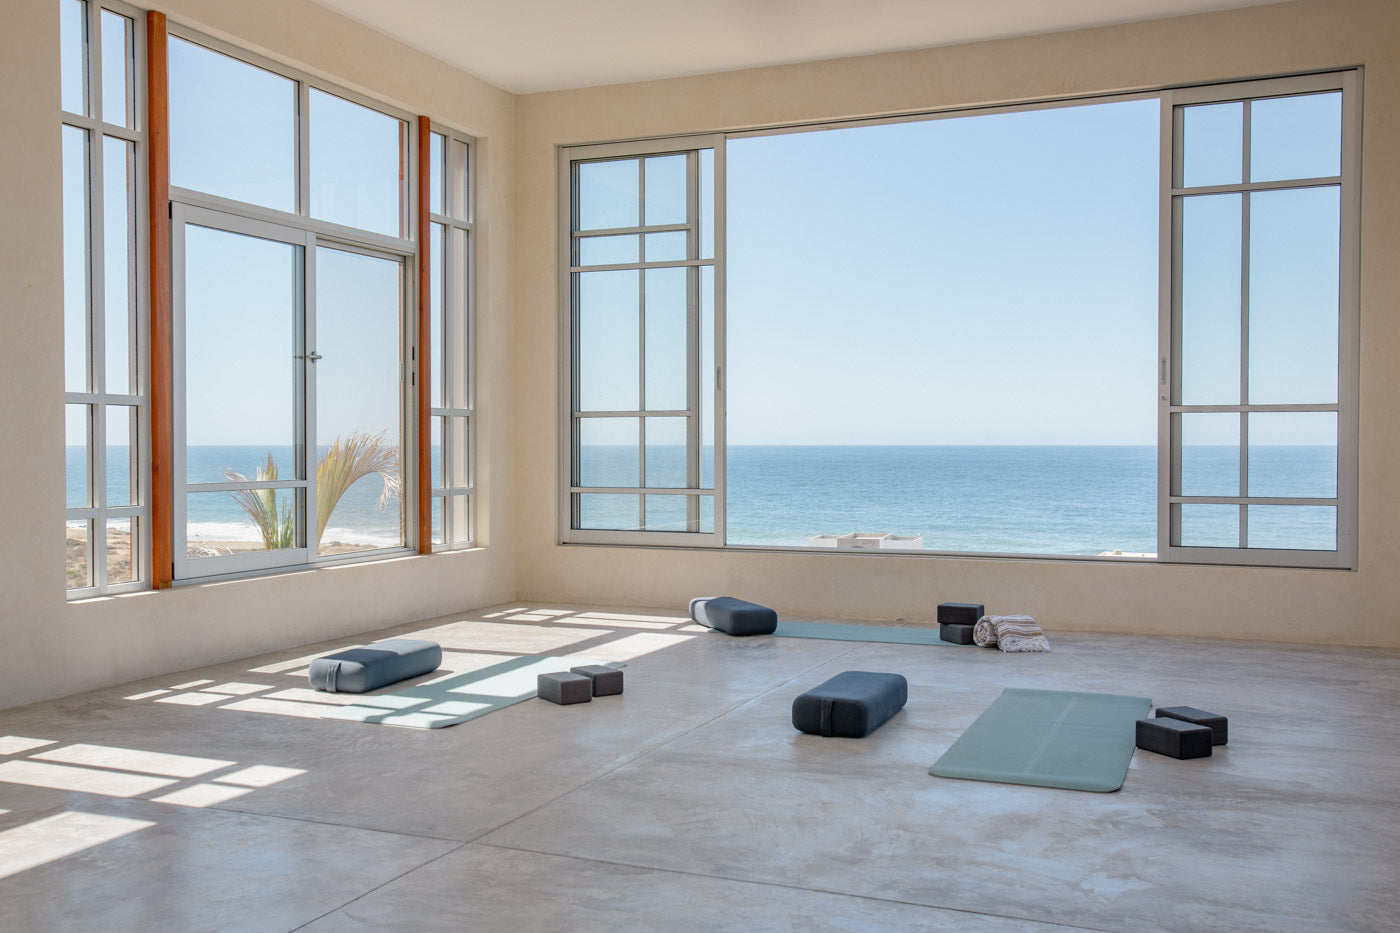 Image of the yoga studio for the Soulside spring renewal and recovery yoga retreat in baja california, mexico